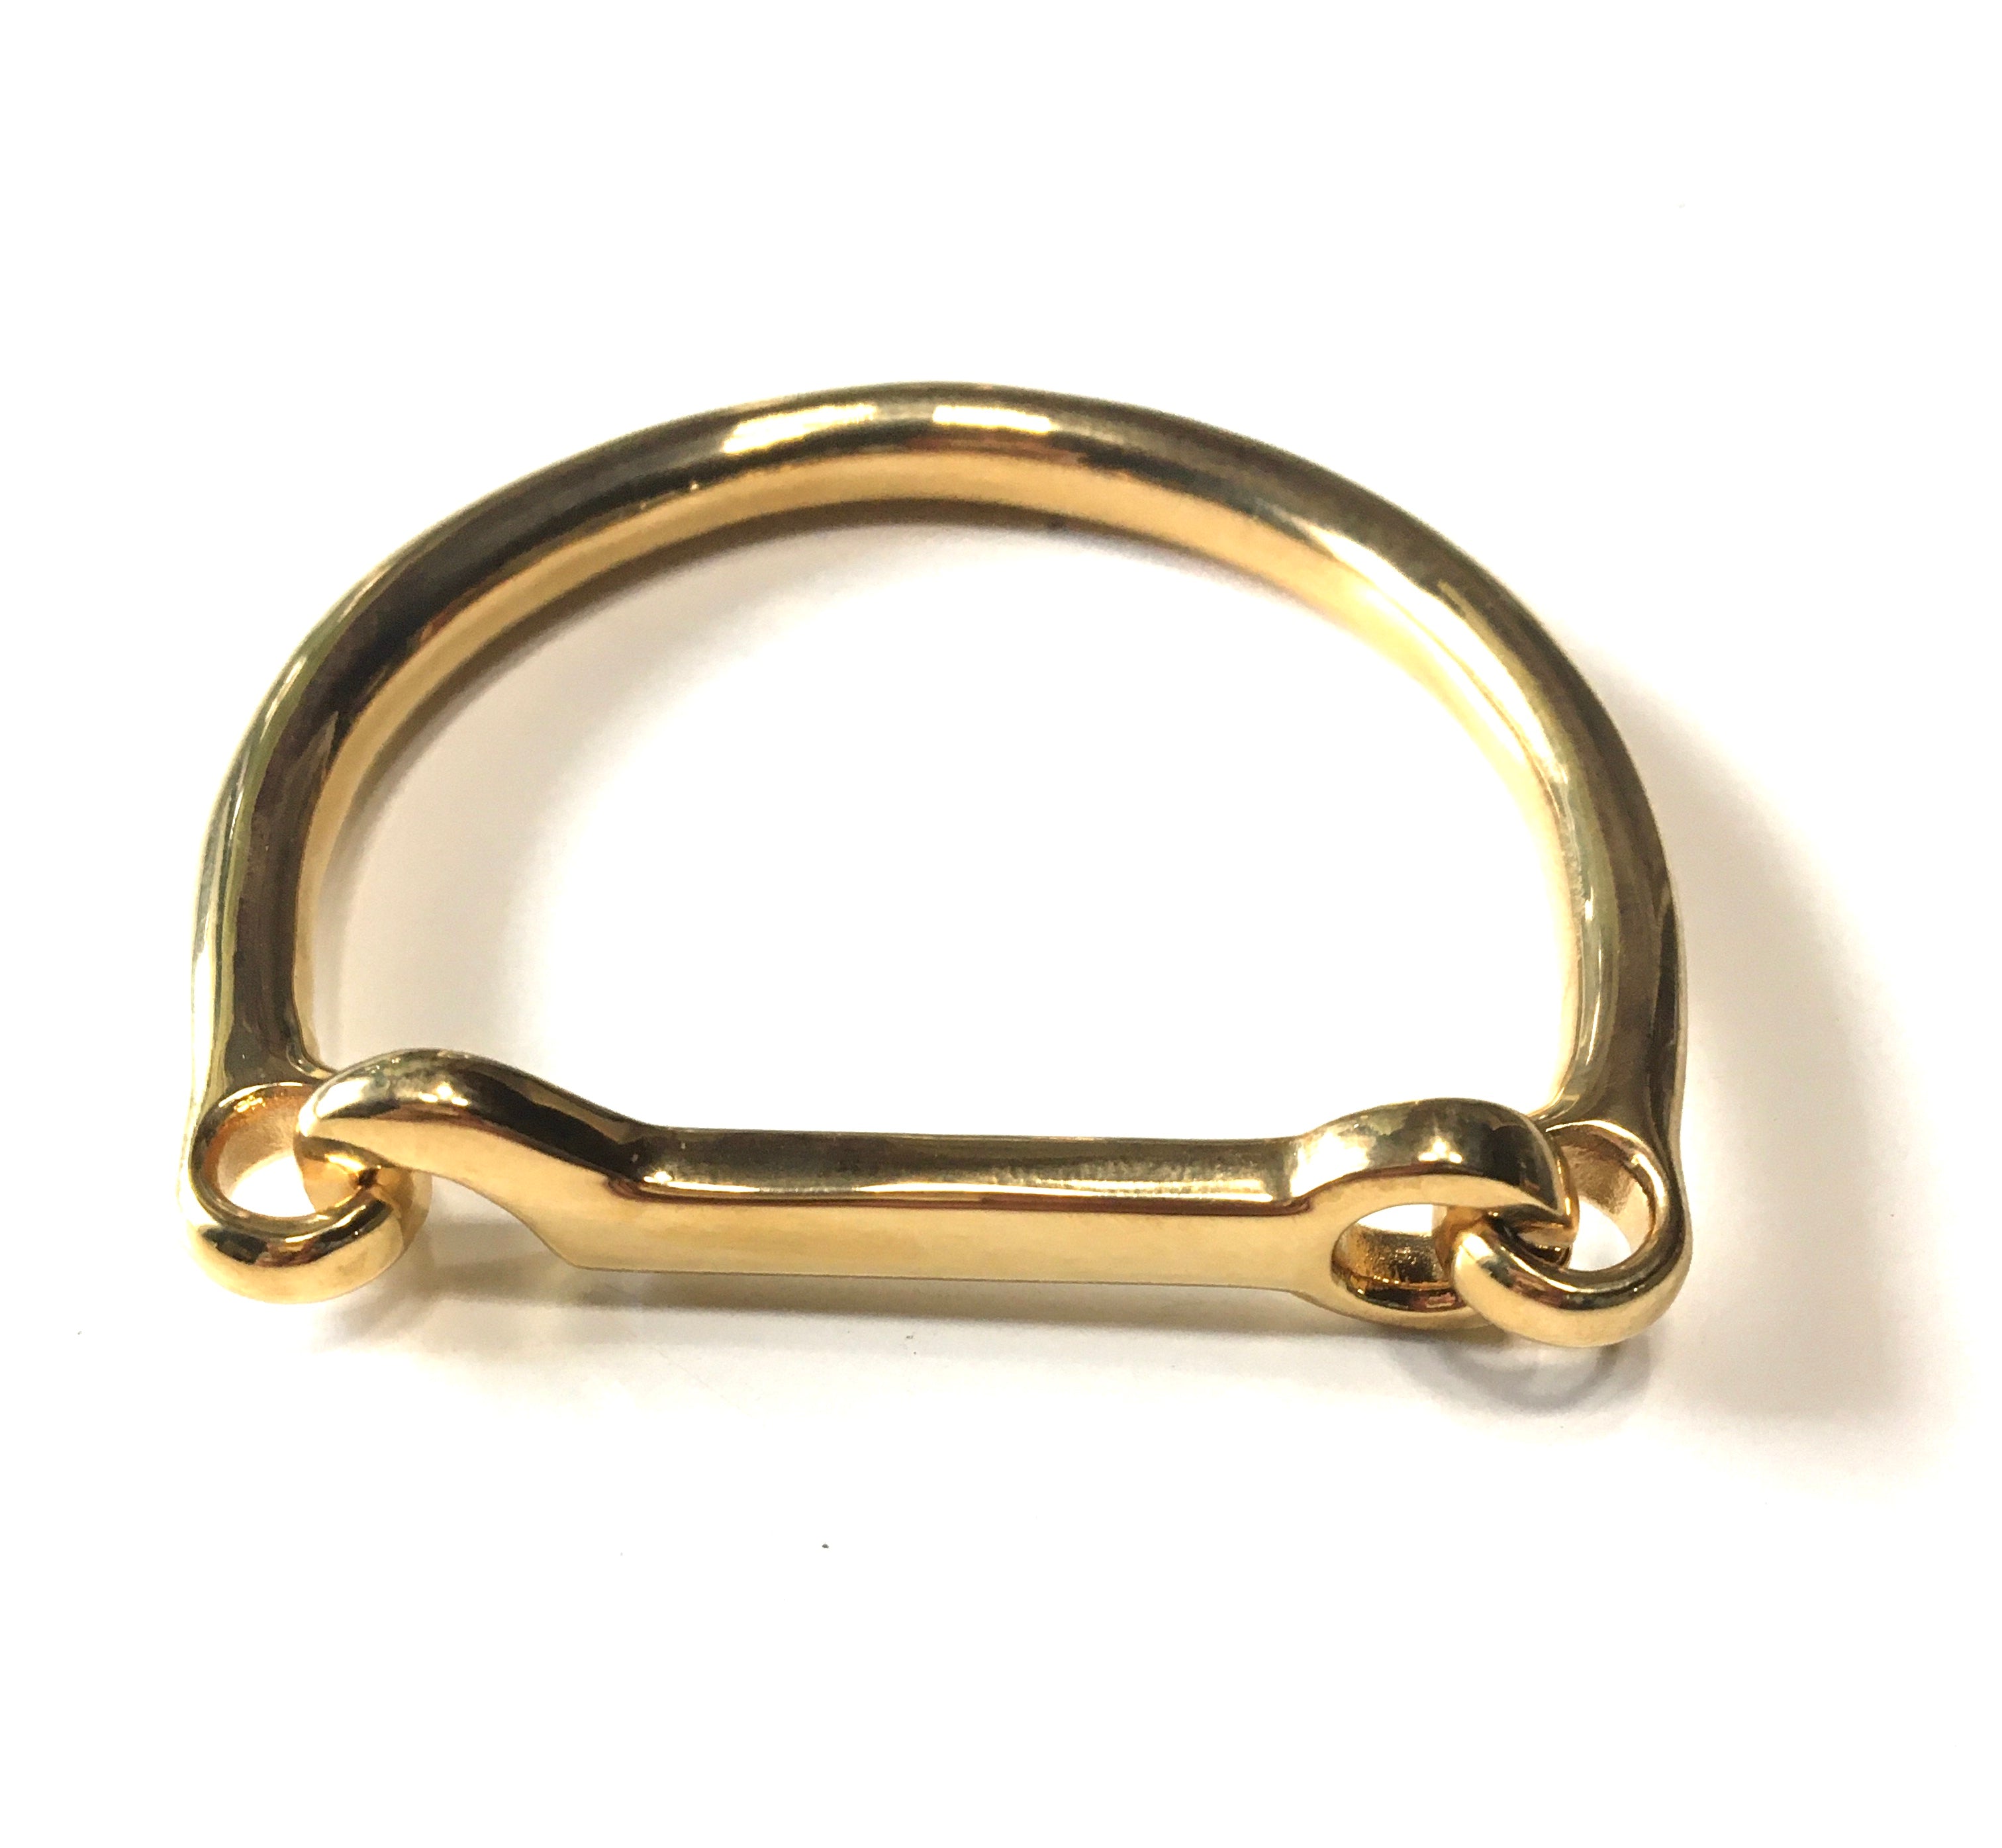 LUSITANO STIRRUP CUFF - GOLD | Equestrian Jewelry | Equestrian Gifts | Stainless Steel Bangle - AtelierCG™